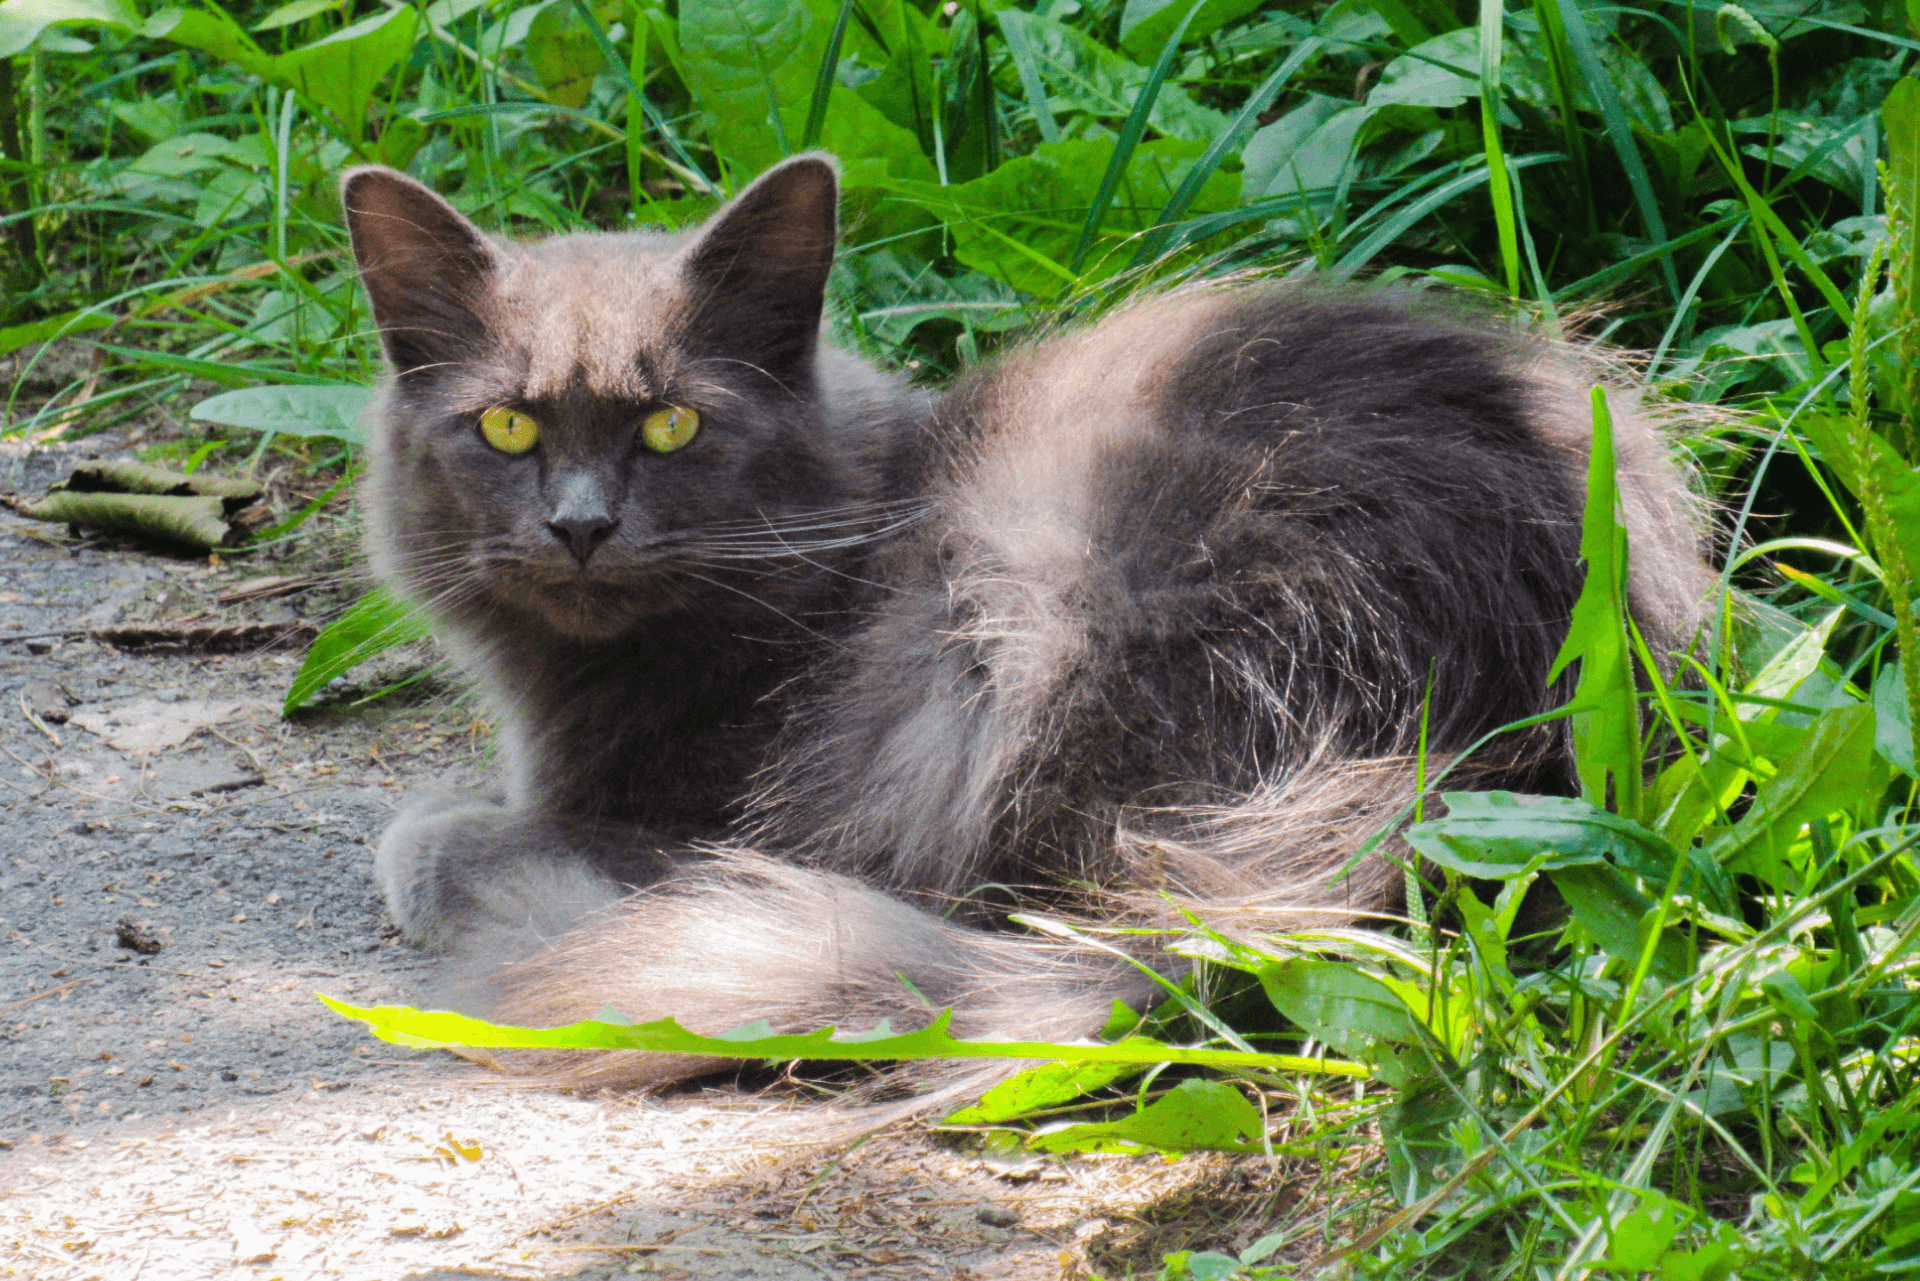 How To Get Rid of Feral Cats? Try These 5 Best Solutions ...